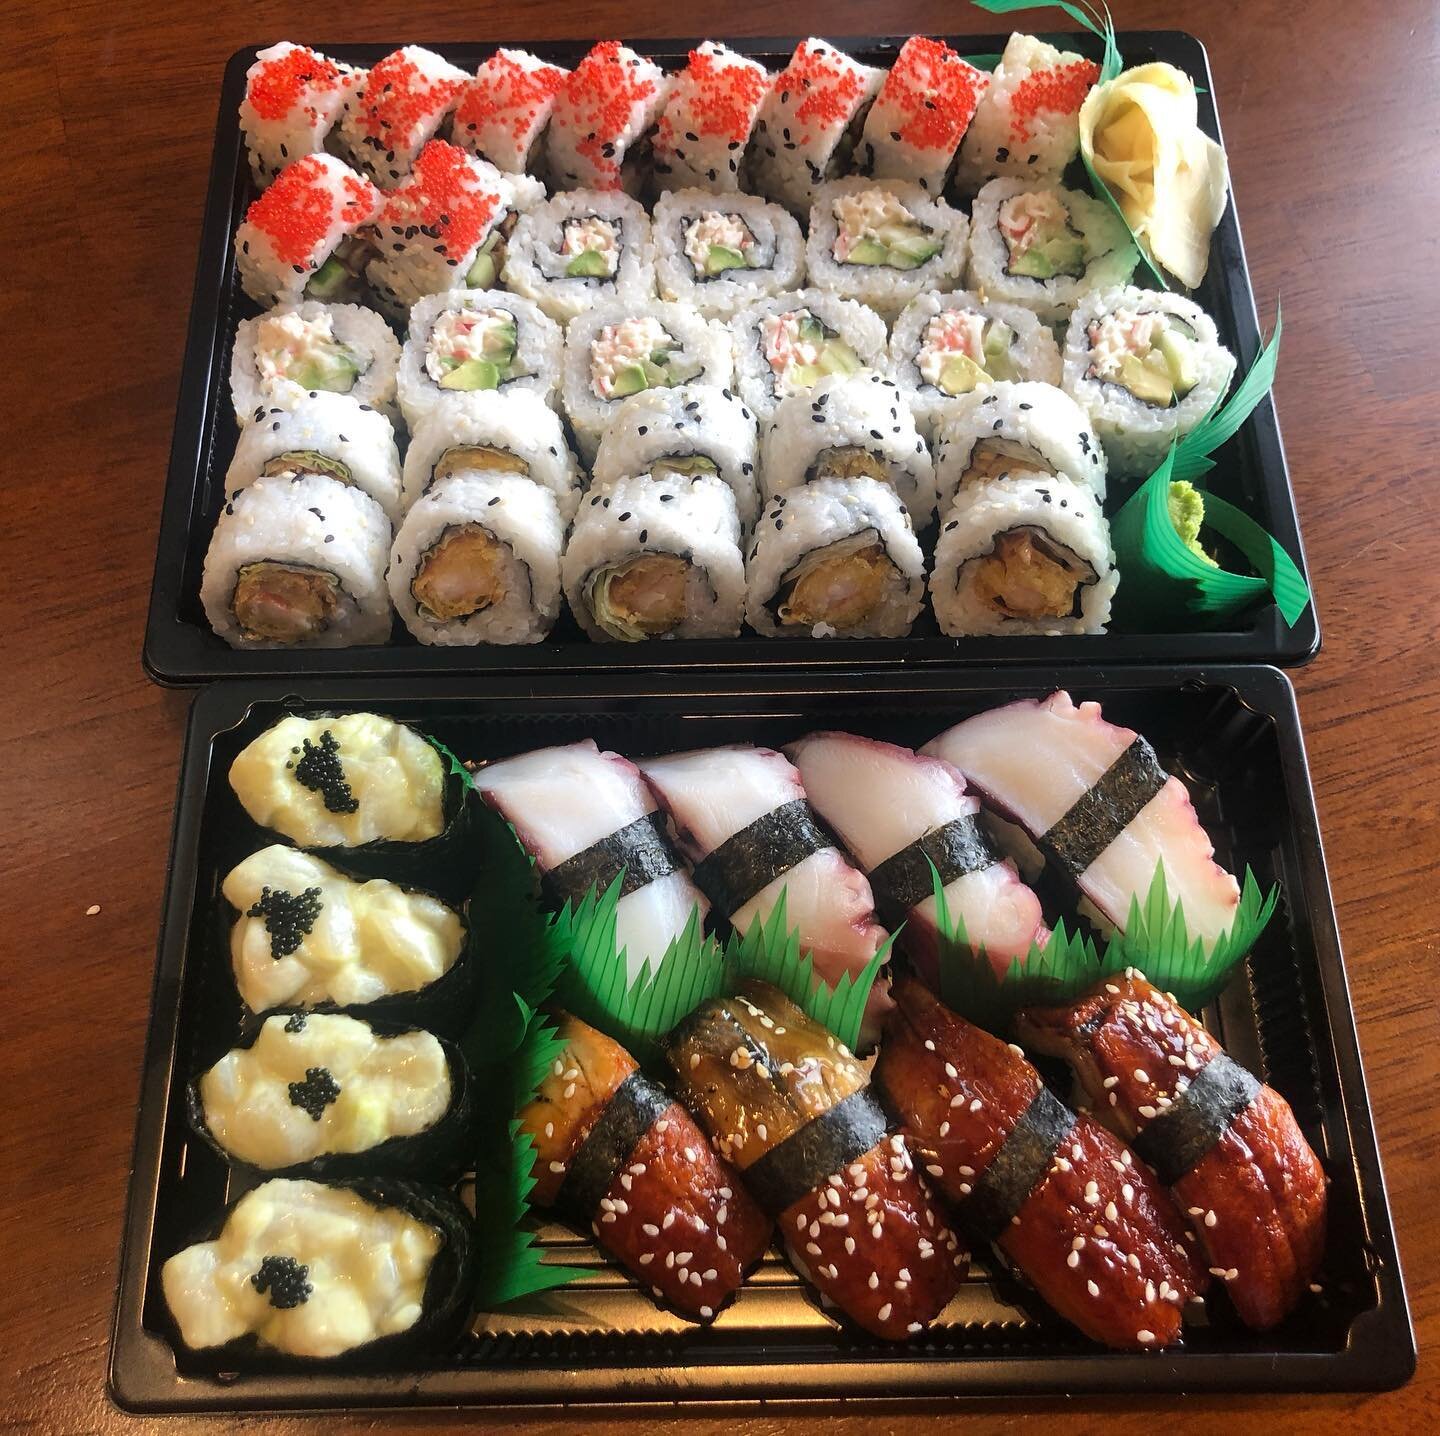 Craving sushi 🍣 for today.....good things you can place order for pick up or delivery#saskatoonsushi #fooddelivery #YXE #YXELocal #yxeeats #yxeliving #yxefood #YXElife #yxesaskatoon #saskatoon #instafood #yqr #yqreats #yqrlocal #saskatooning @visits